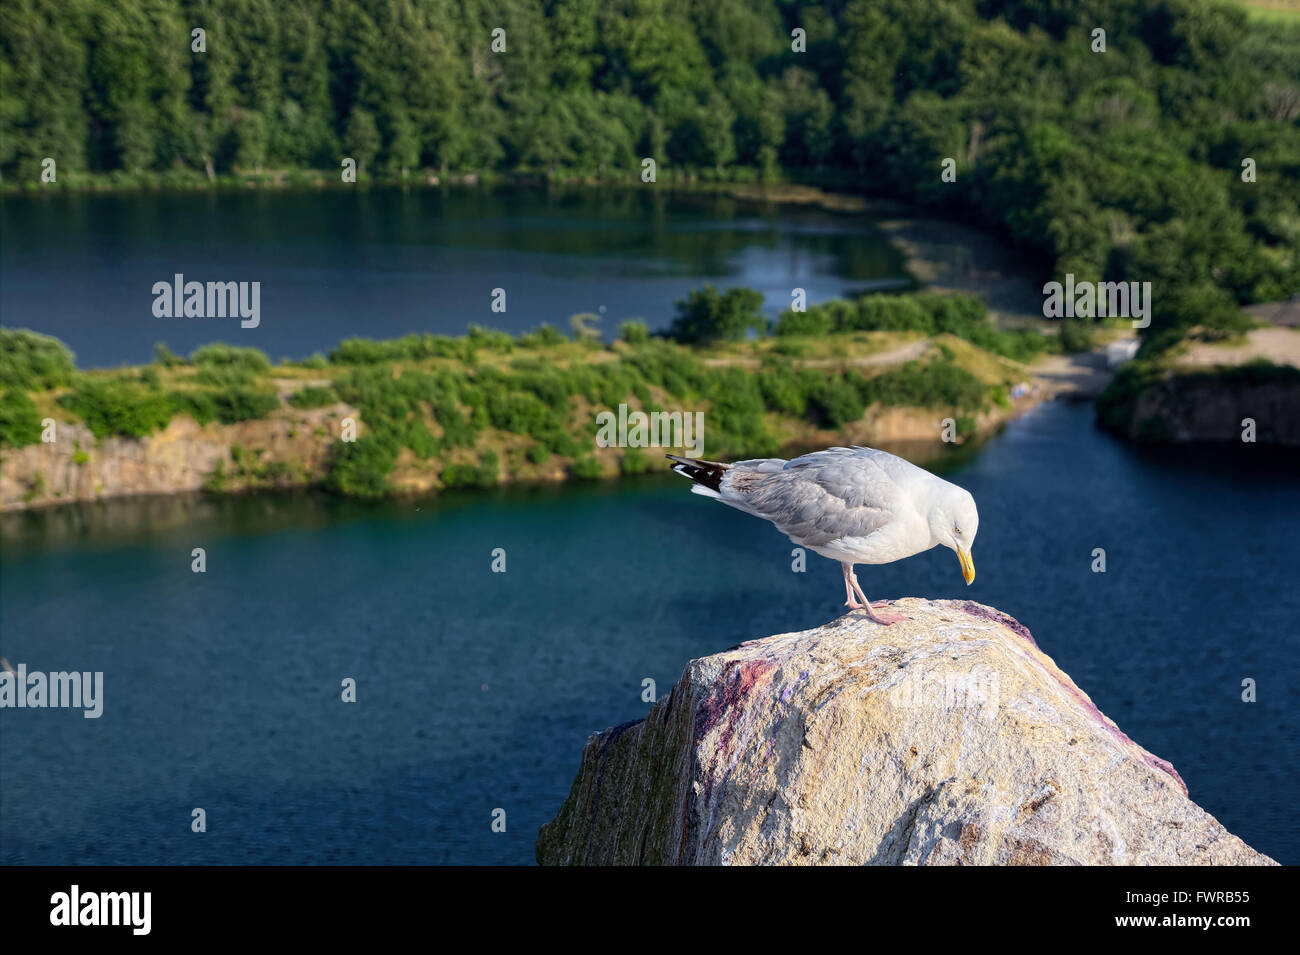 Seagull standing on a rock with the lake Emerald on Bornholm, in the background Stock Photo